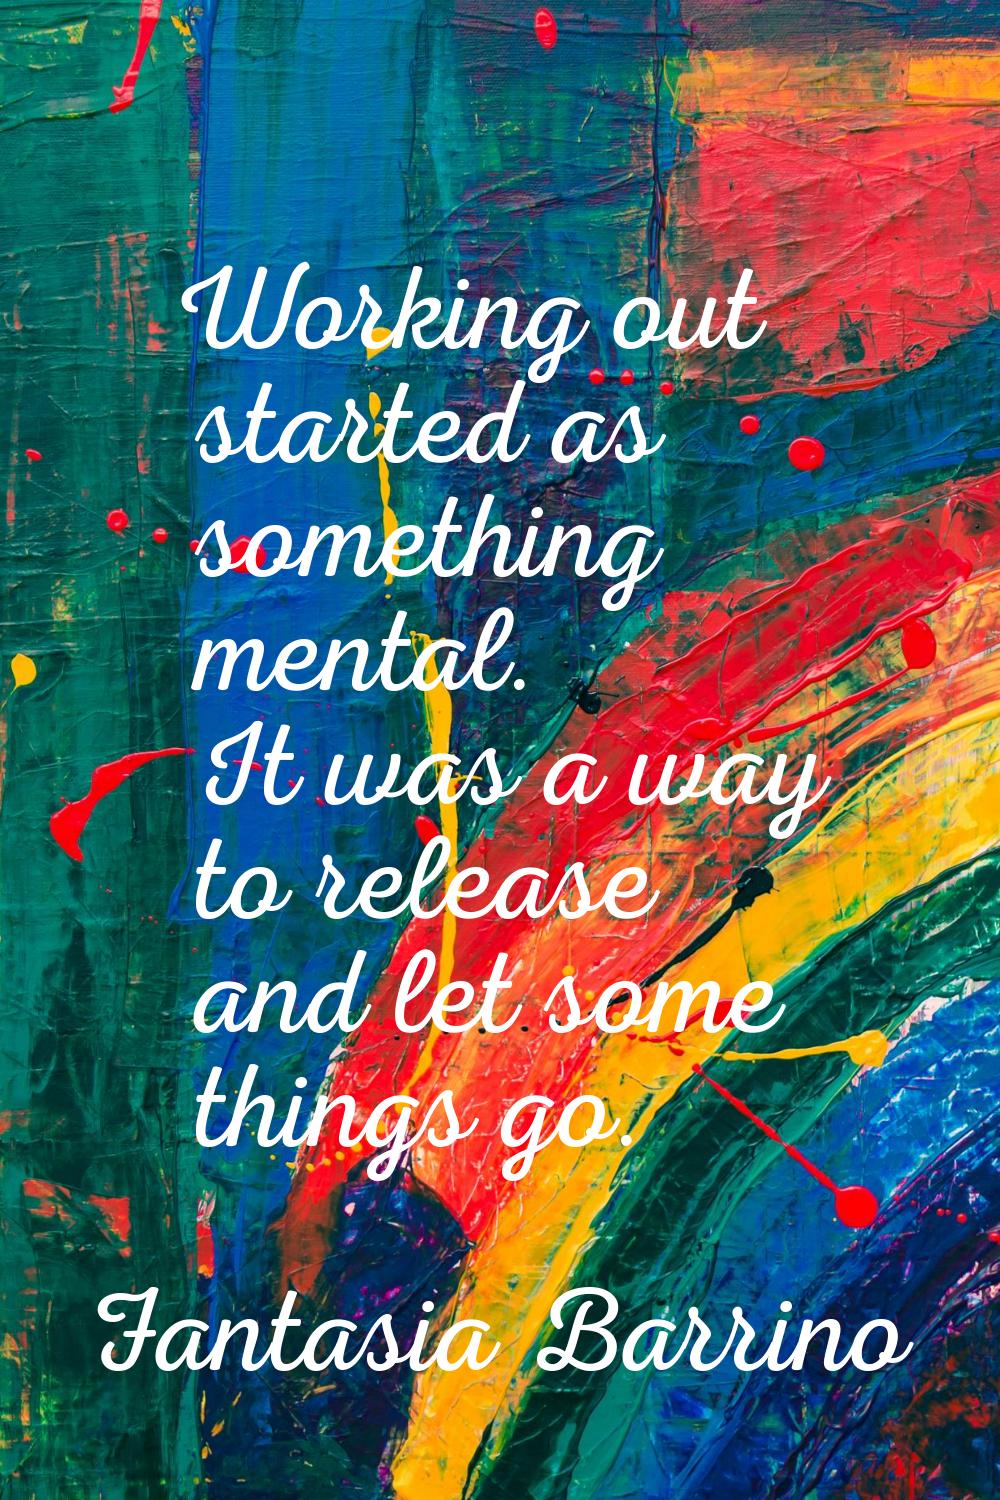 Working out started as something mental. It was a way to release and let some things go.